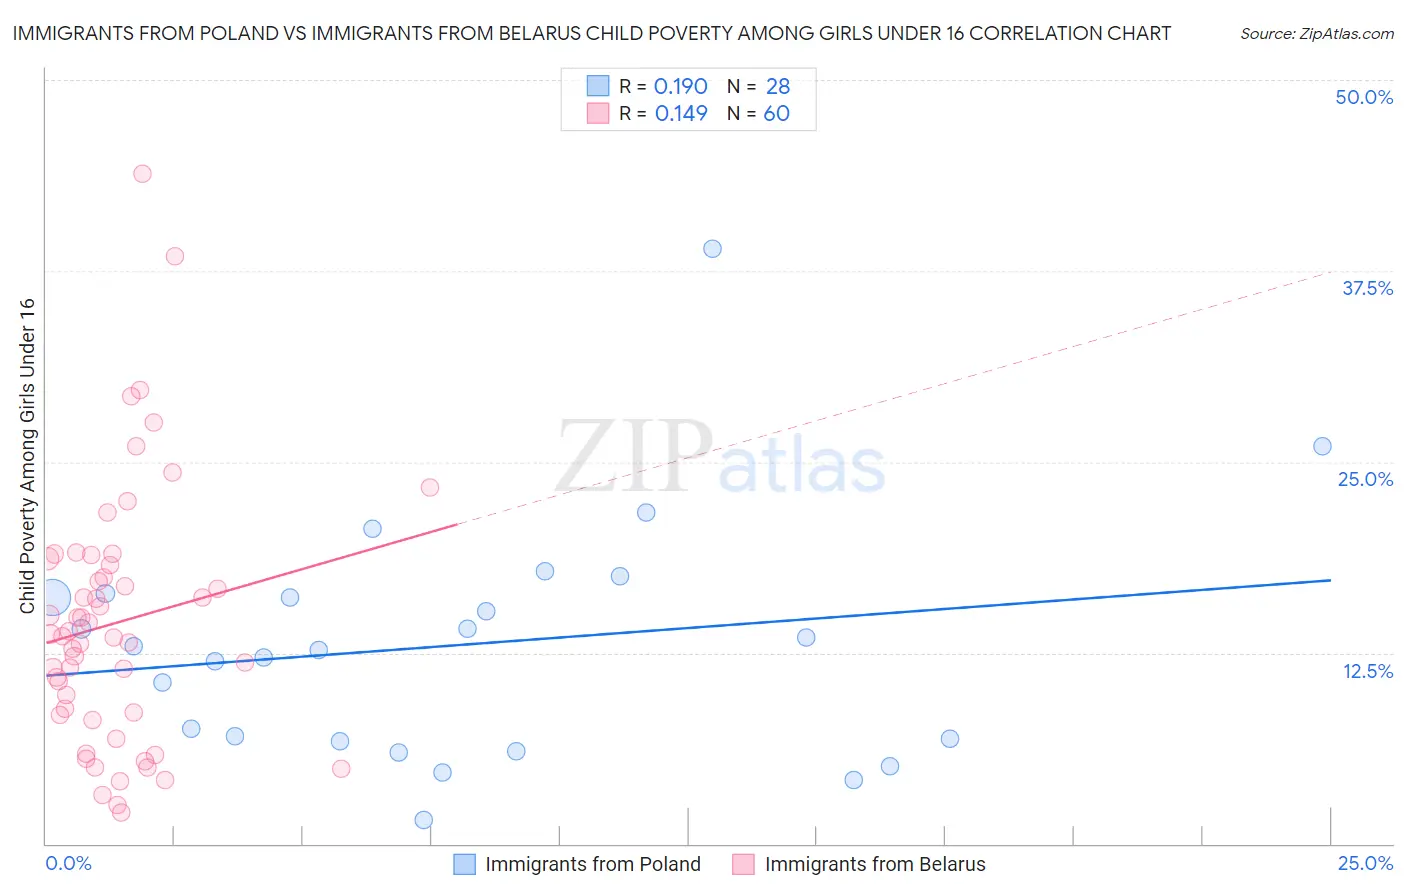 Immigrants from Poland vs Immigrants from Belarus Child Poverty Among Girls Under 16